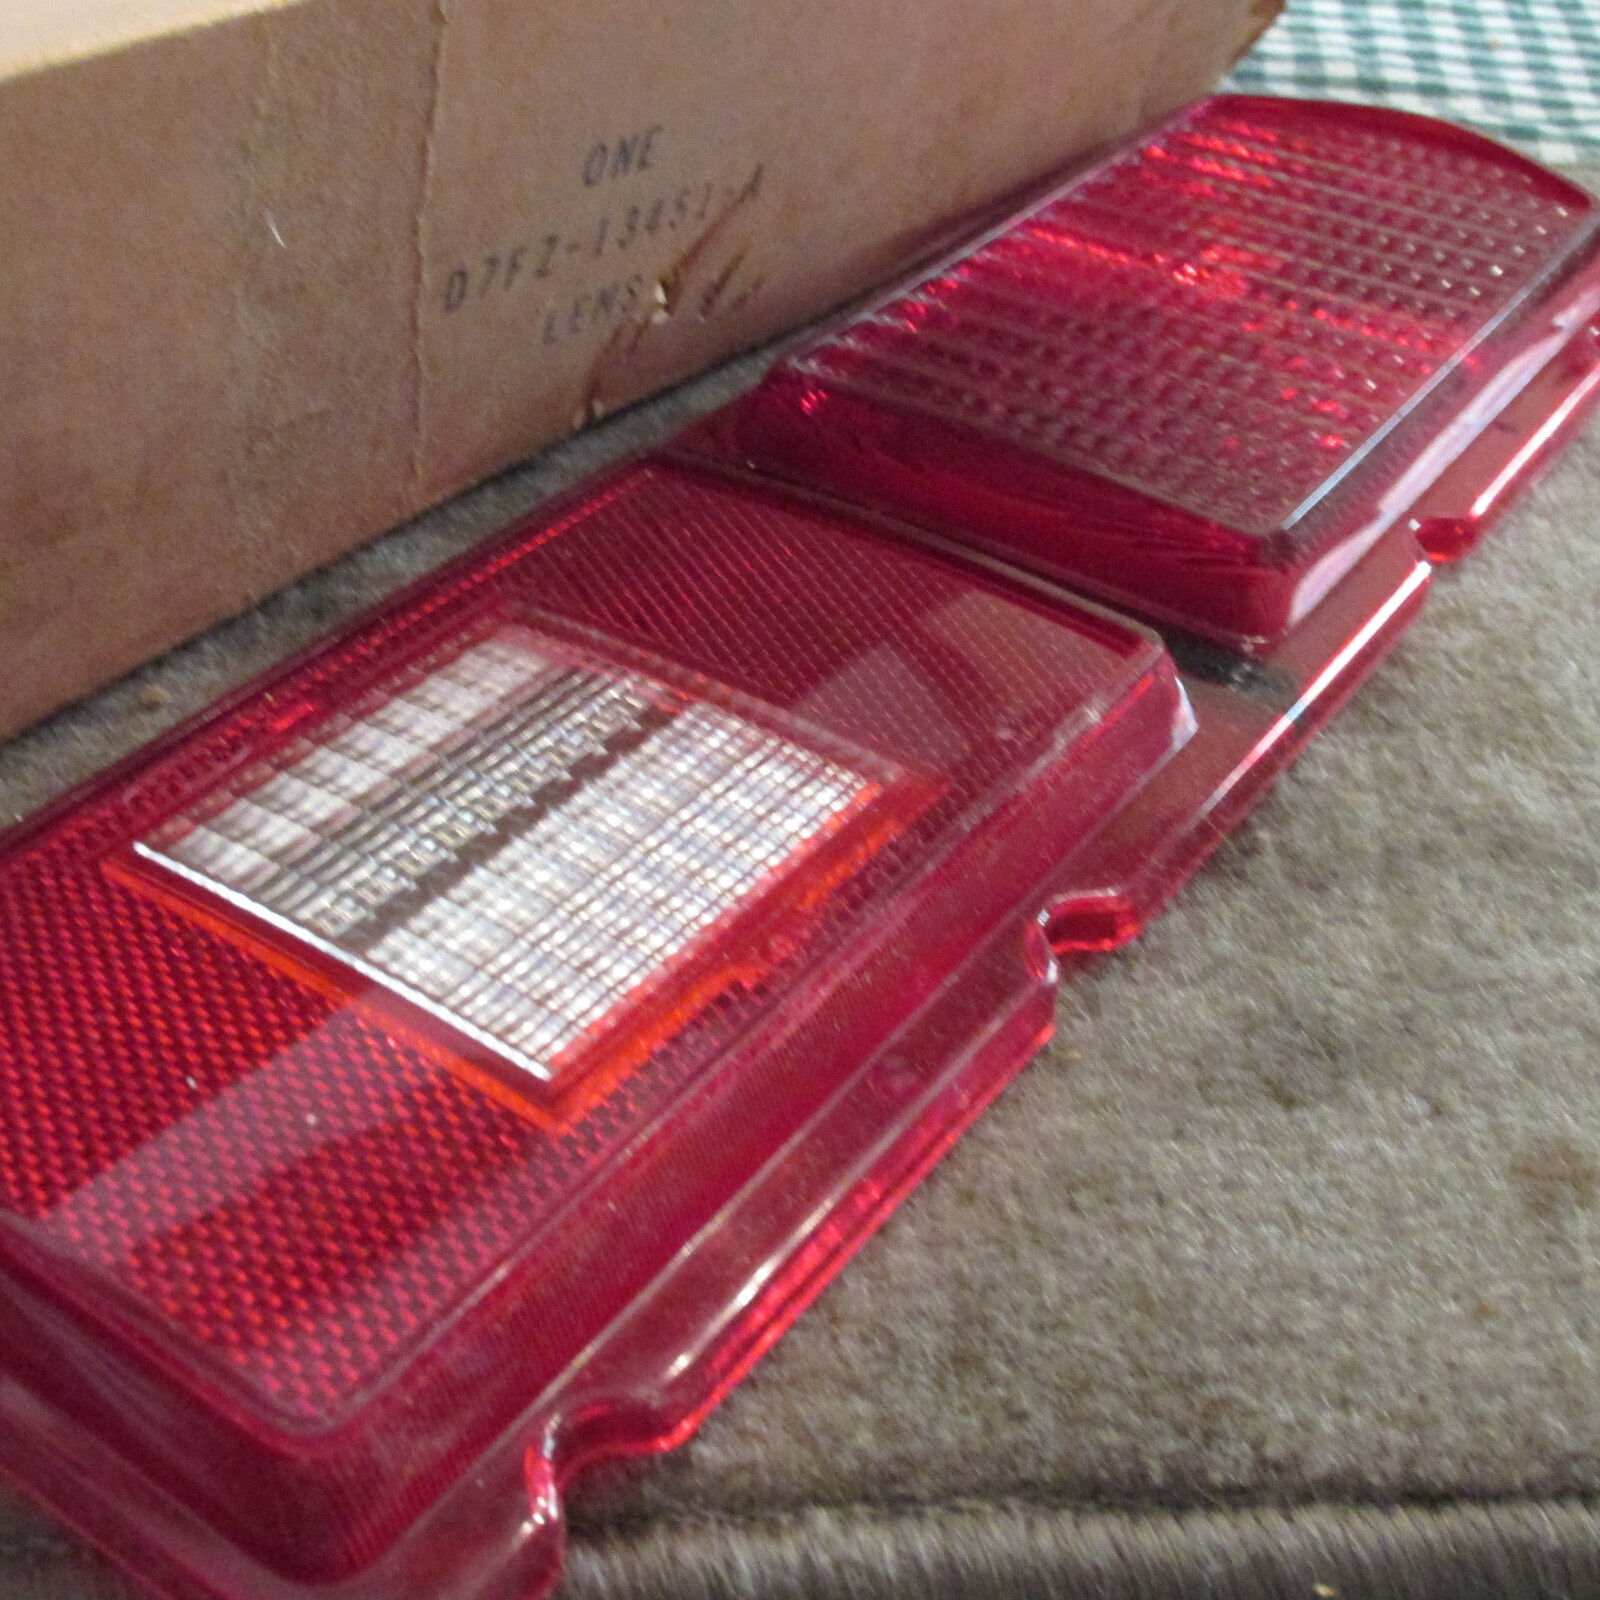 NOS 1977 1978 FORD PINTO DRIVERS SIDE REAR TAILLIGHT TAIL LIGHT LENS D7FZ13451A